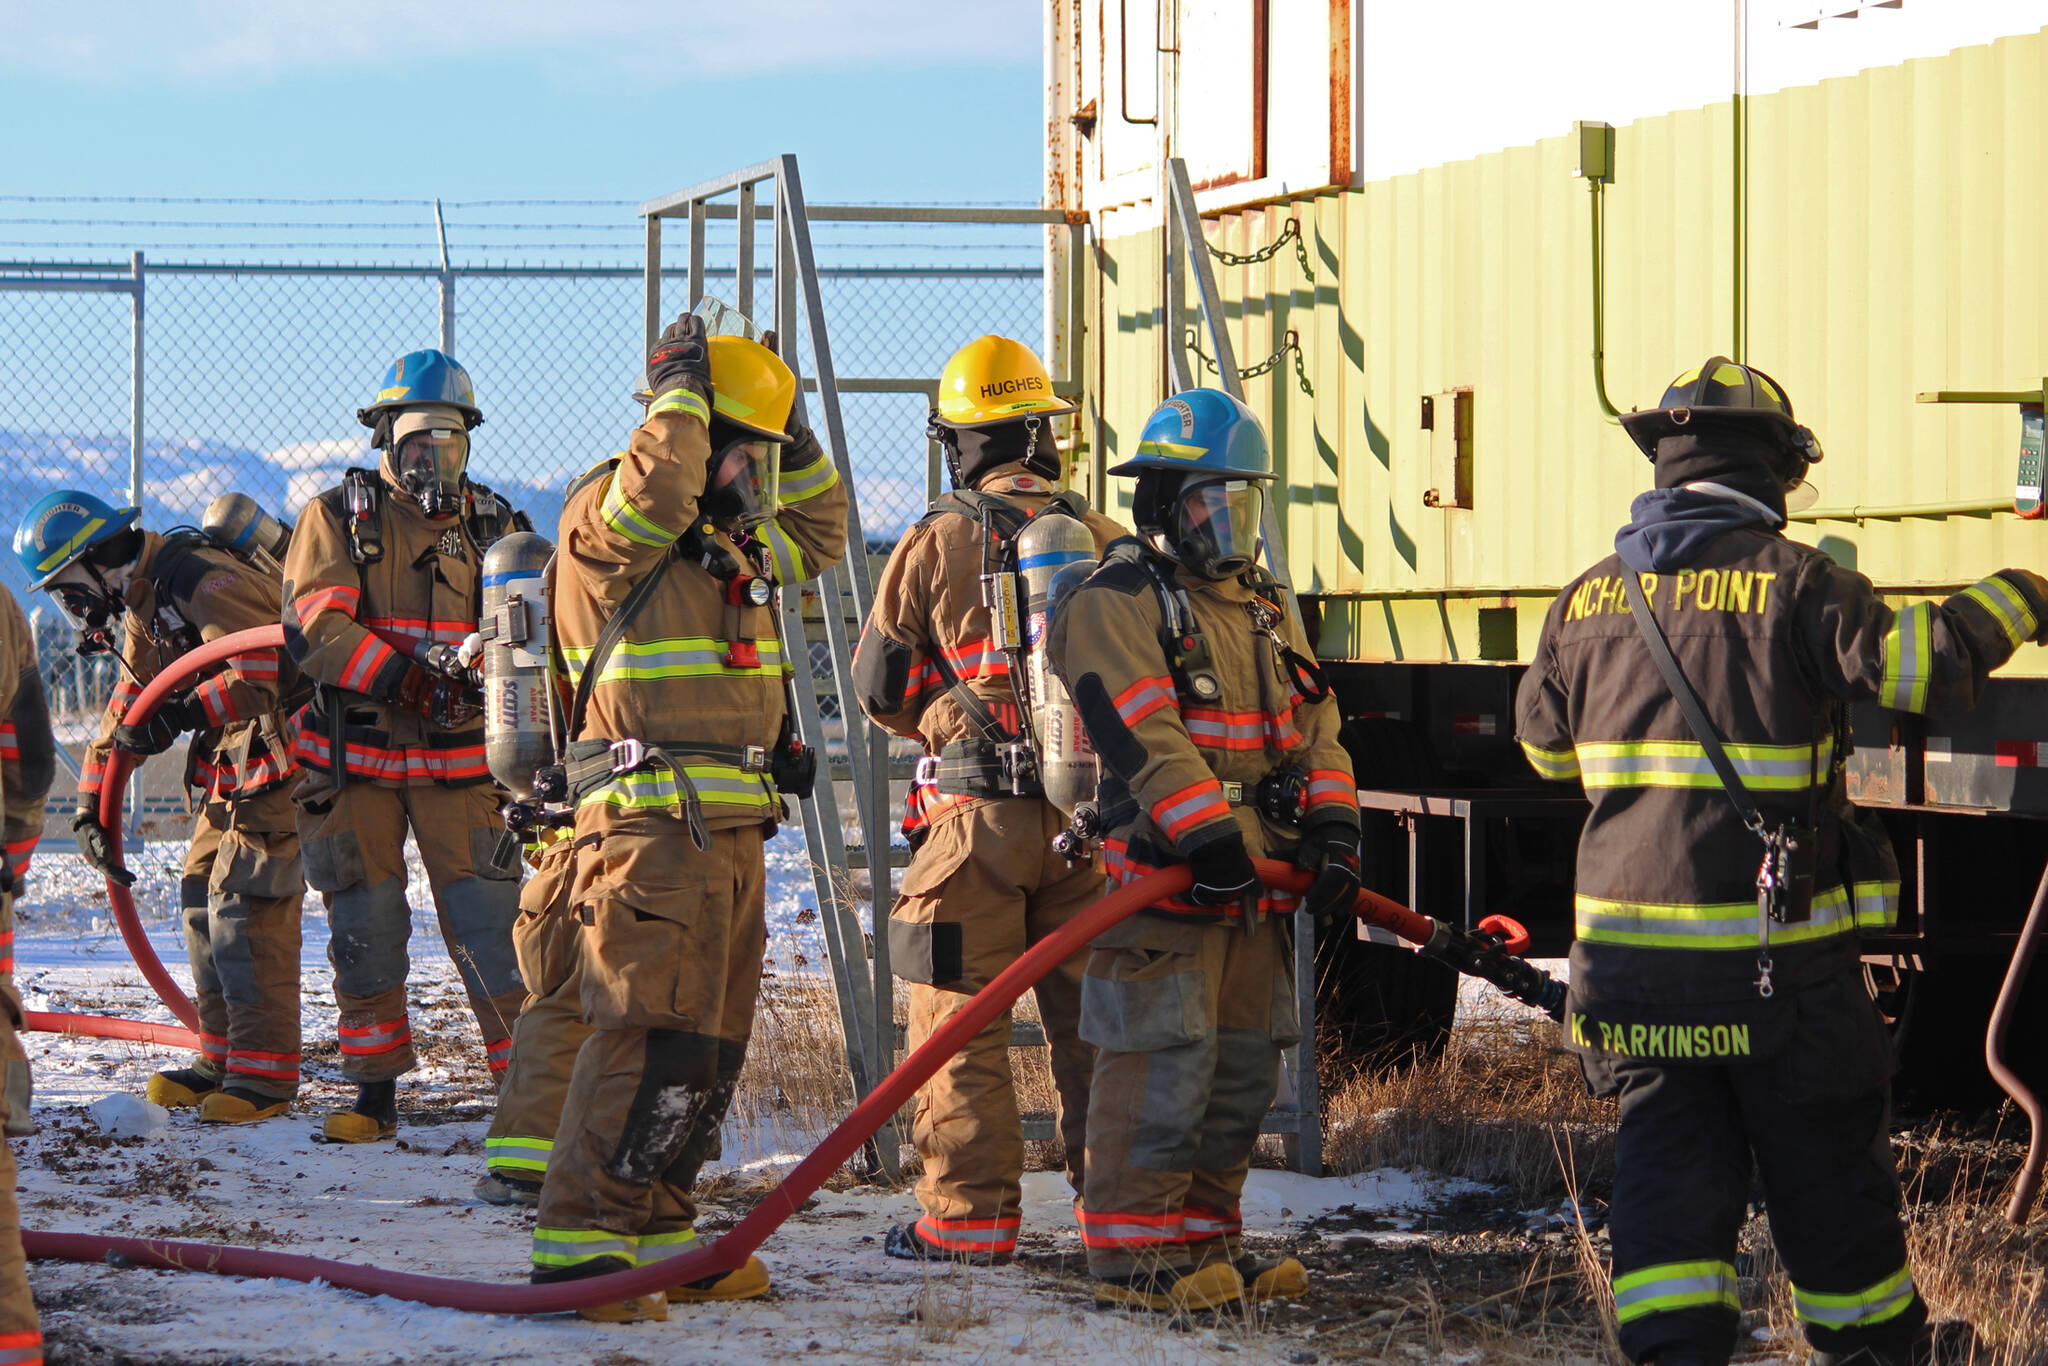 Firefighters from multiple agencies prepare to enter a structure with a fire burning inside it as part of a live fire exercise Saturday, Feb. 23, 2019 at the Homer Volunteer Fire Department���s fire training facility on Freight Dock Road in Homer, Alaska. Student volunteers from Anchor Point Emergency Services, Homer Volunteer Fire Department, Ninilchik Emergency Services, and Central Emergency Services attended the drill as part of a joint Firefighter I class they are attending hosted by Anchor Point Fire and HVFD. (Photo by Megan Pacer/Homer News)